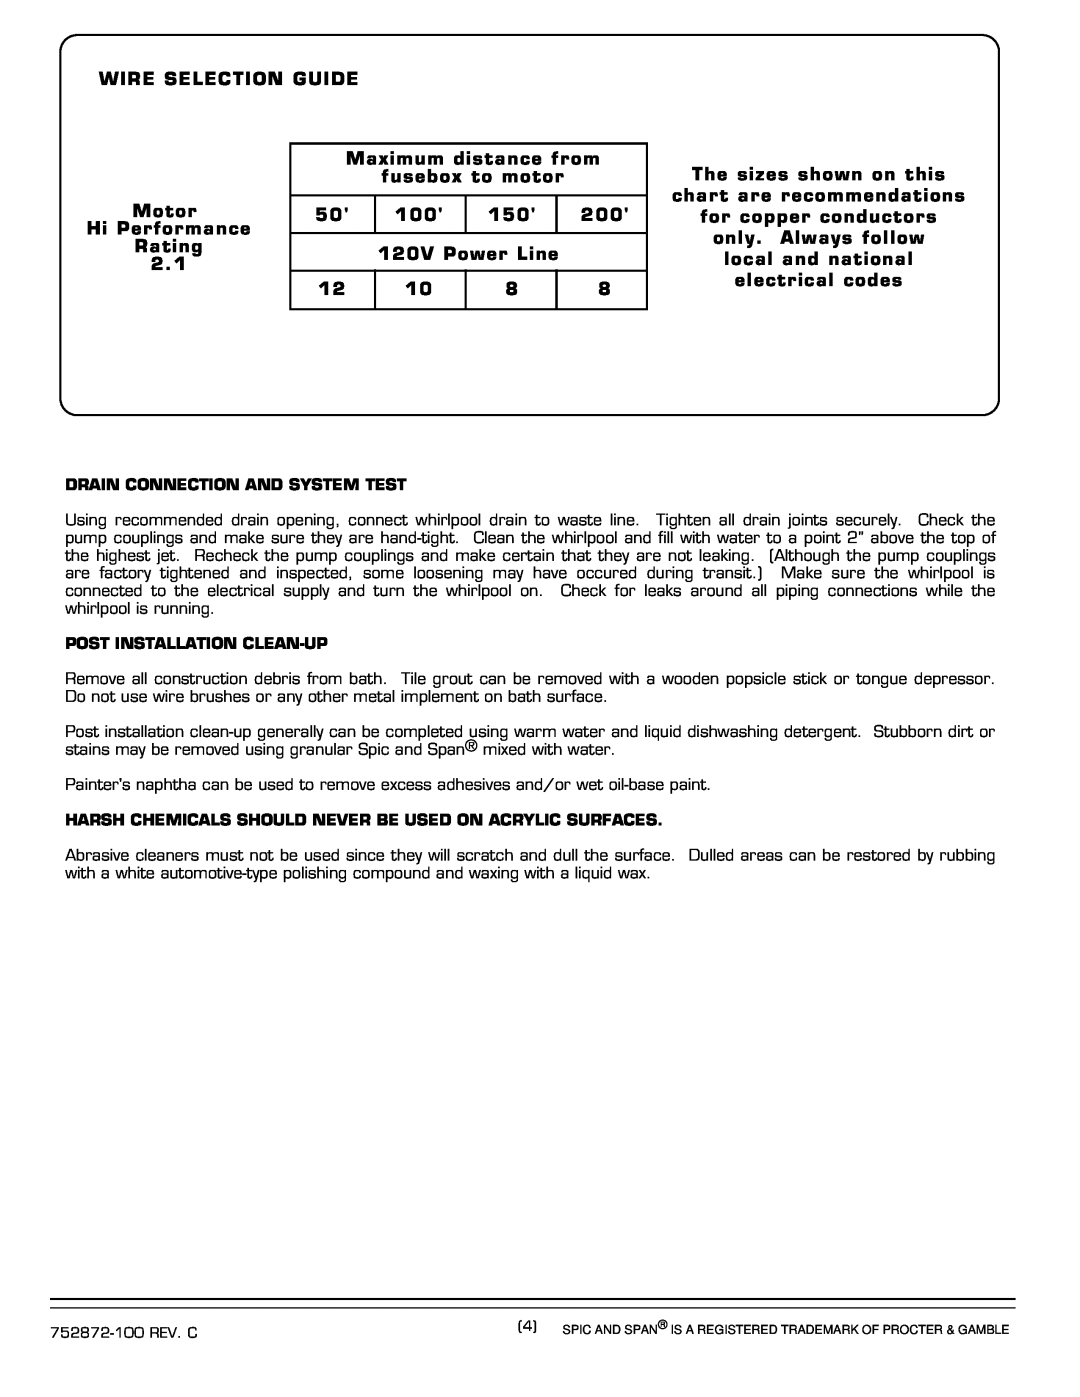 American Standard 2806E installation instructions Wire Selection Guide 